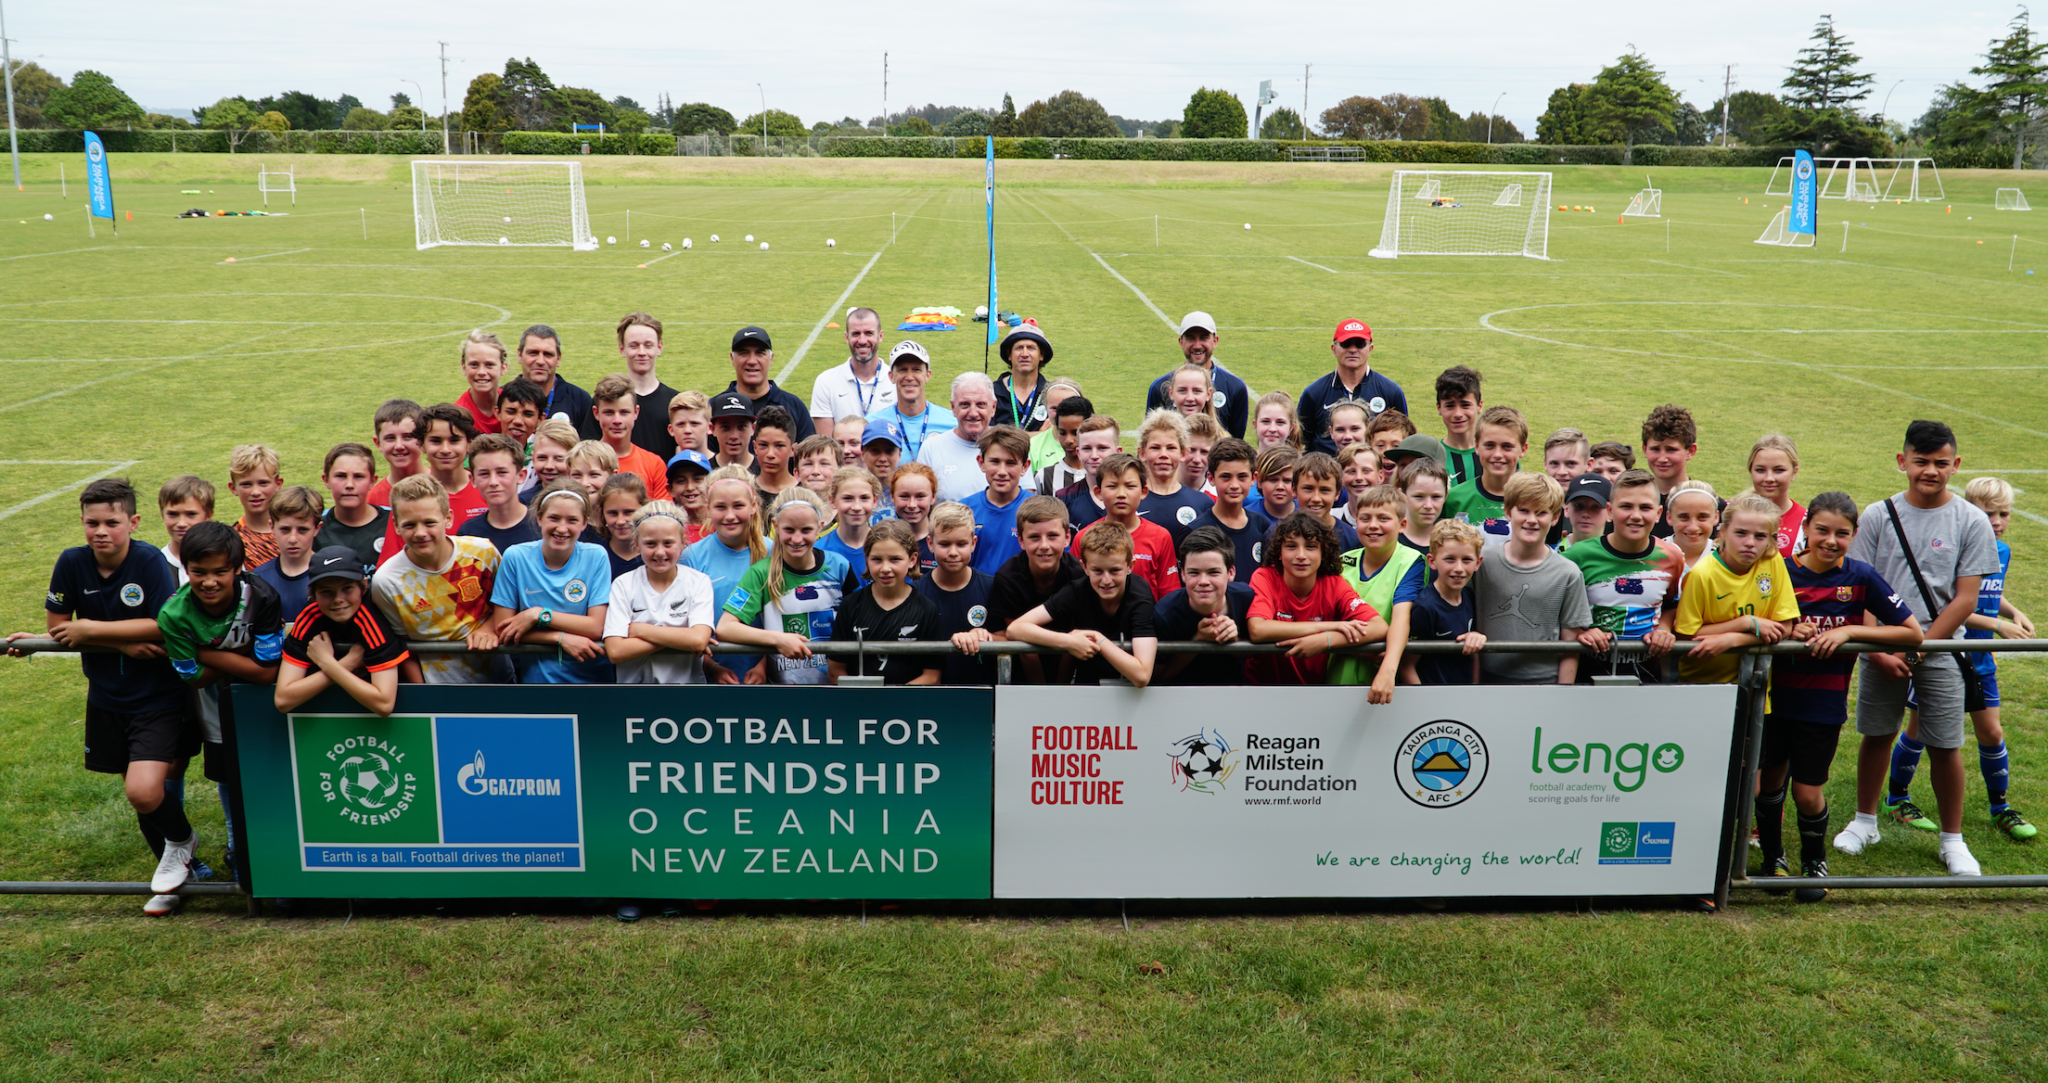 IN THE NEWS: Father and son Ron and Shane Boyle able to share passion for football in Tauranga